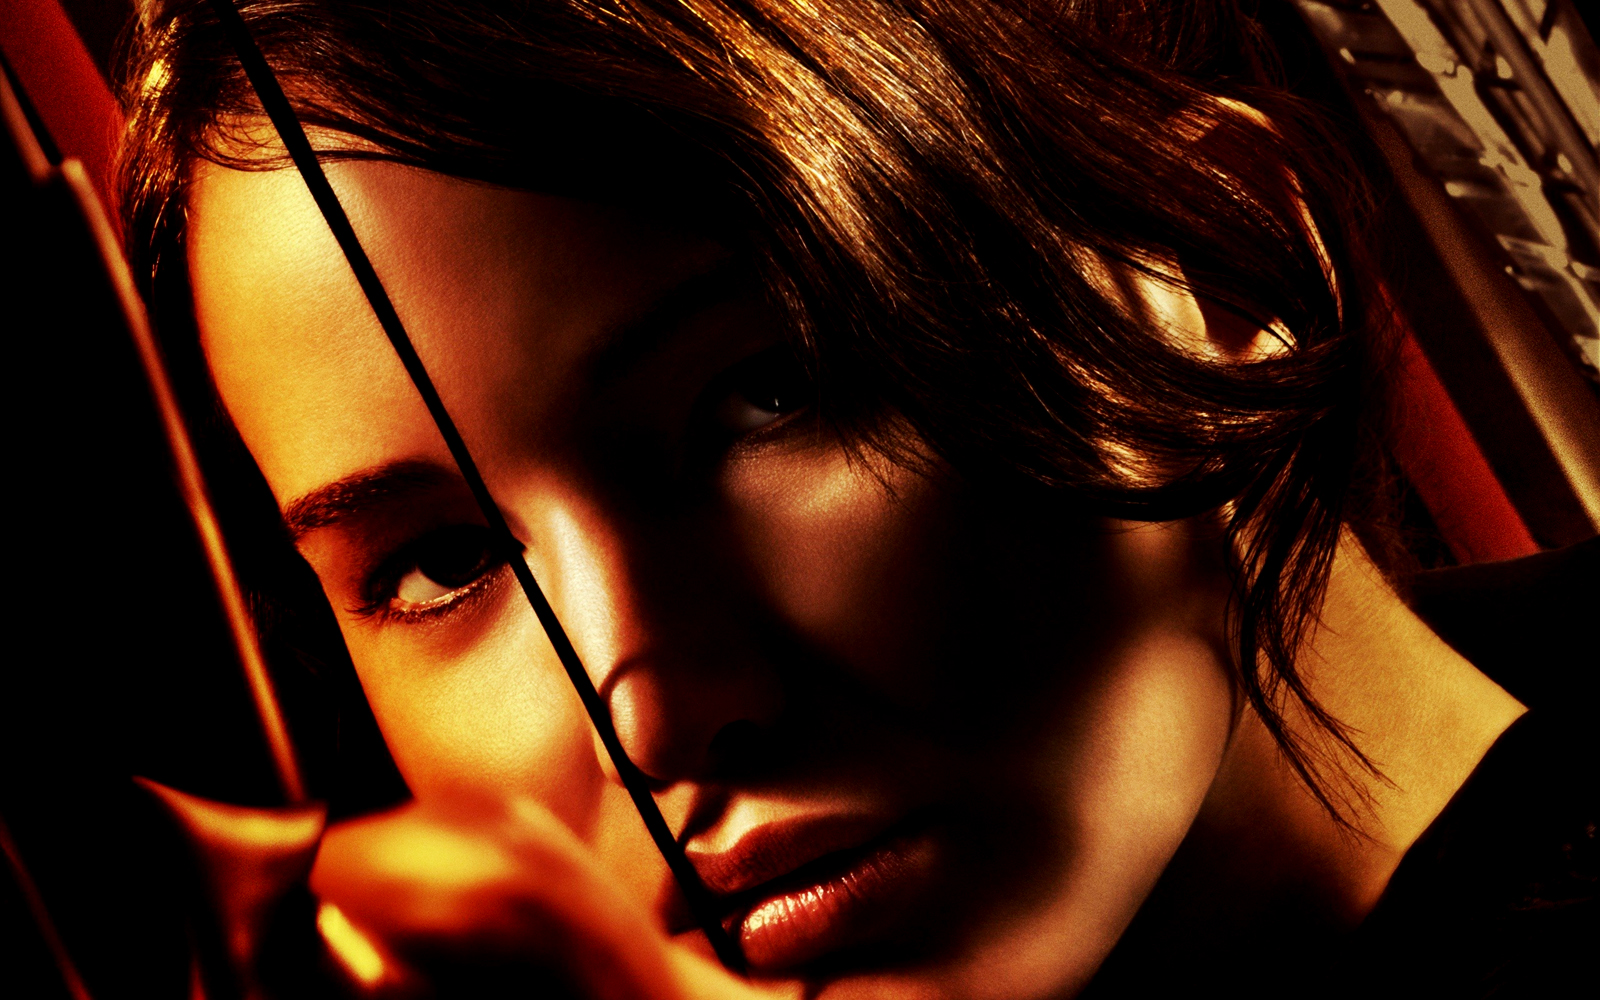  Hunger Games Posters HD Wallpapers Download Free Wallpapers in HD for